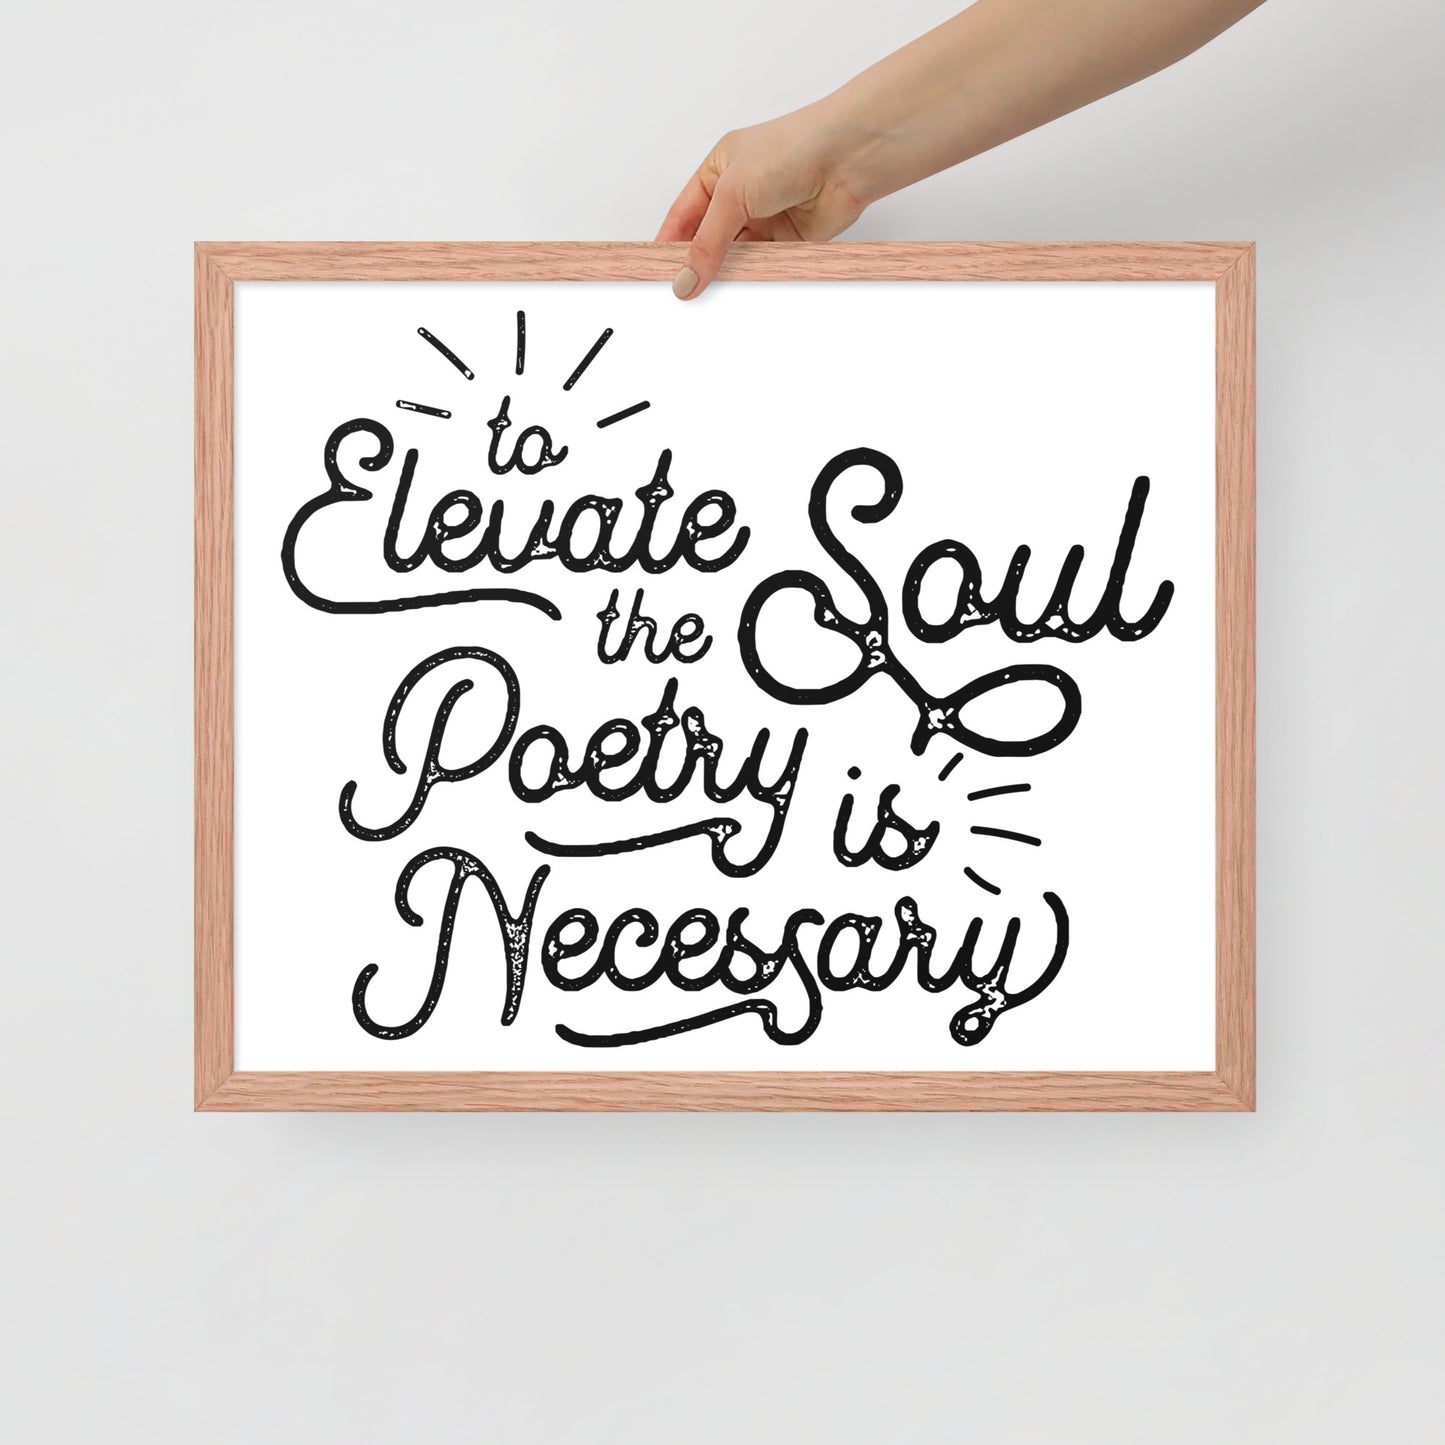 To Elevate the Soul Poetry is Necessary Framed Poster - 16 x 20 Red Oak Frame